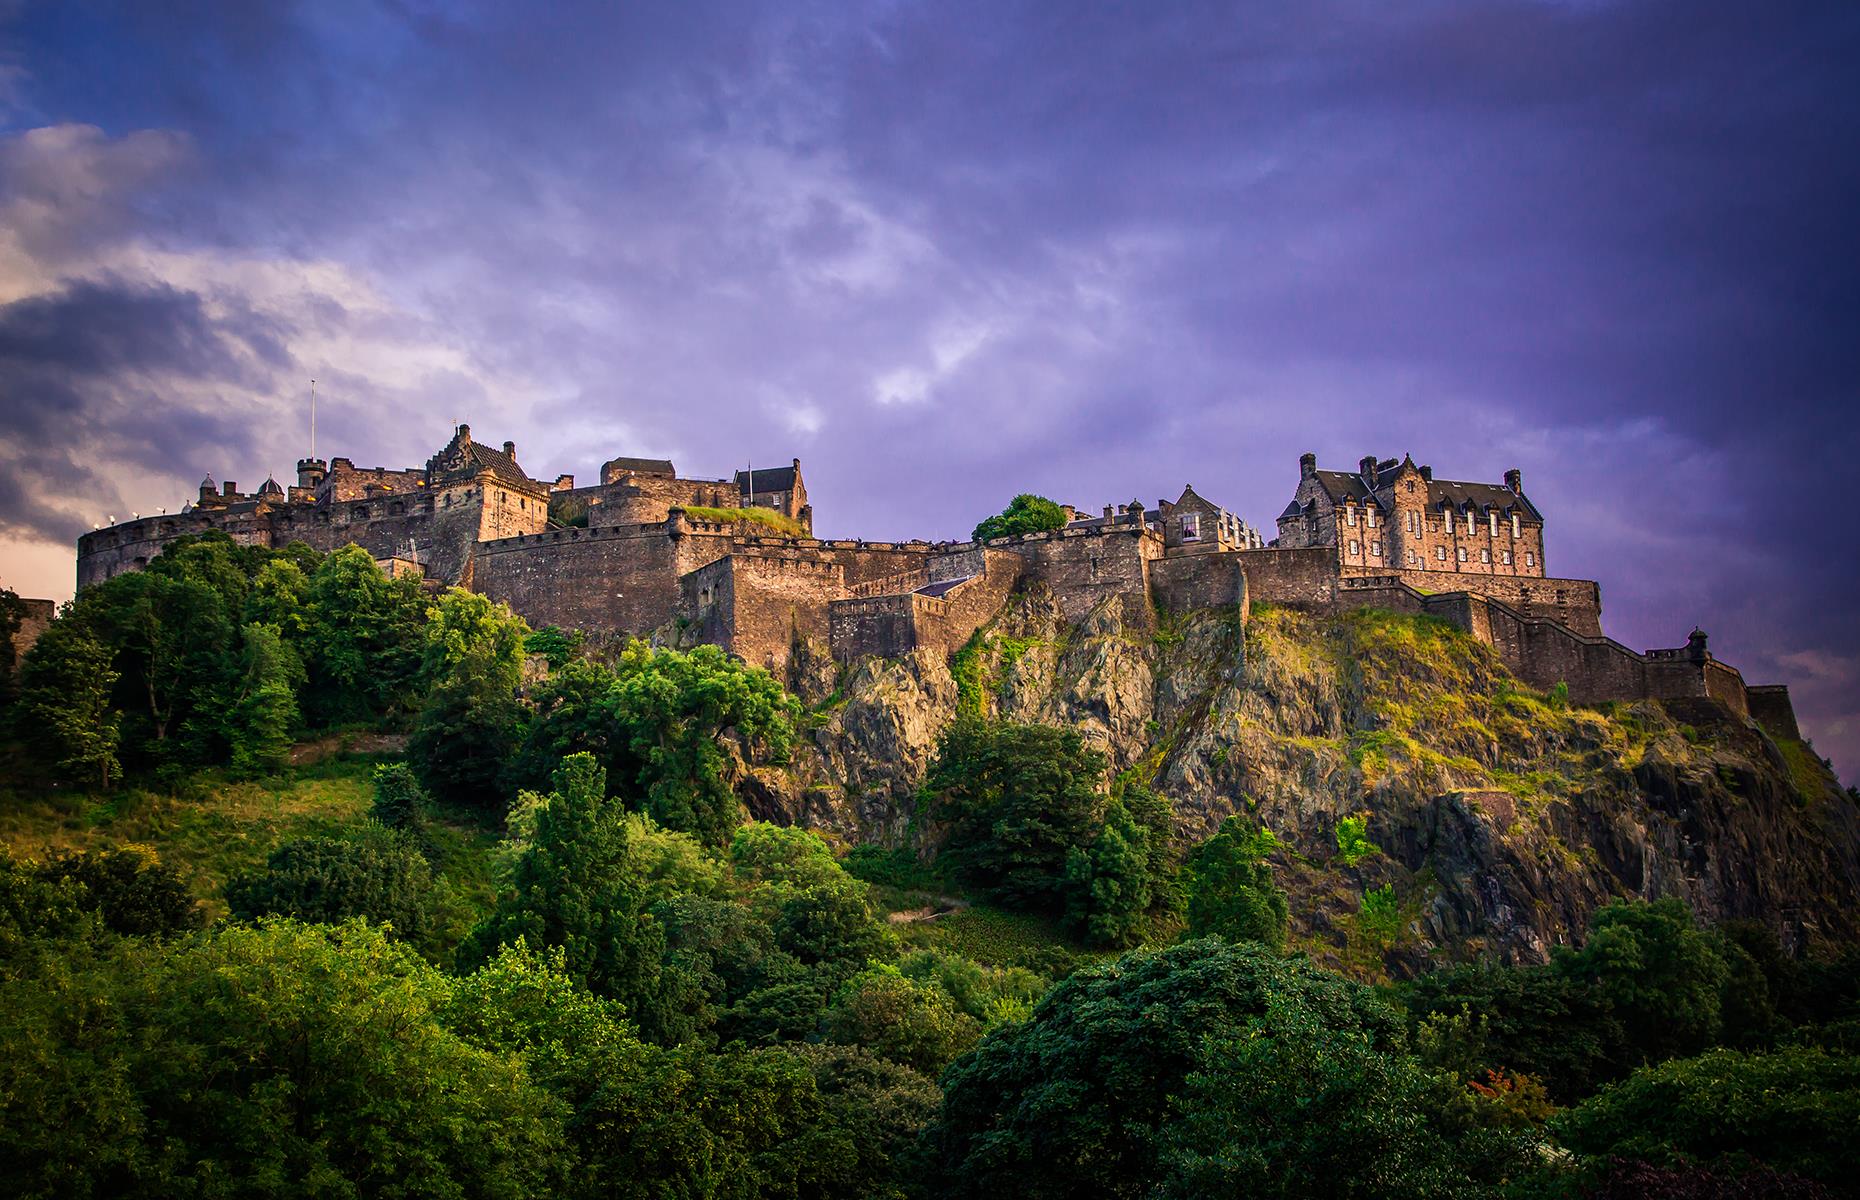 <p>Brooding on Castle Rock, <a href="https://www.edinburghcastle.scot/">Edinburgh's famous fortress</a> has a history with roots right back to the Iron Age and, over the years, it's served as a royal home, a military site and a defensive stronghold. Now it's the Scottish capital's top attraction, drawing history buffs through its Great Hall and sprawling courtyards. It's a site favoured by ghost-hunters too. The dungeons, where many prisoners endured cruel treatment, are said to be filled with the ghosts of tortured souls.</p>